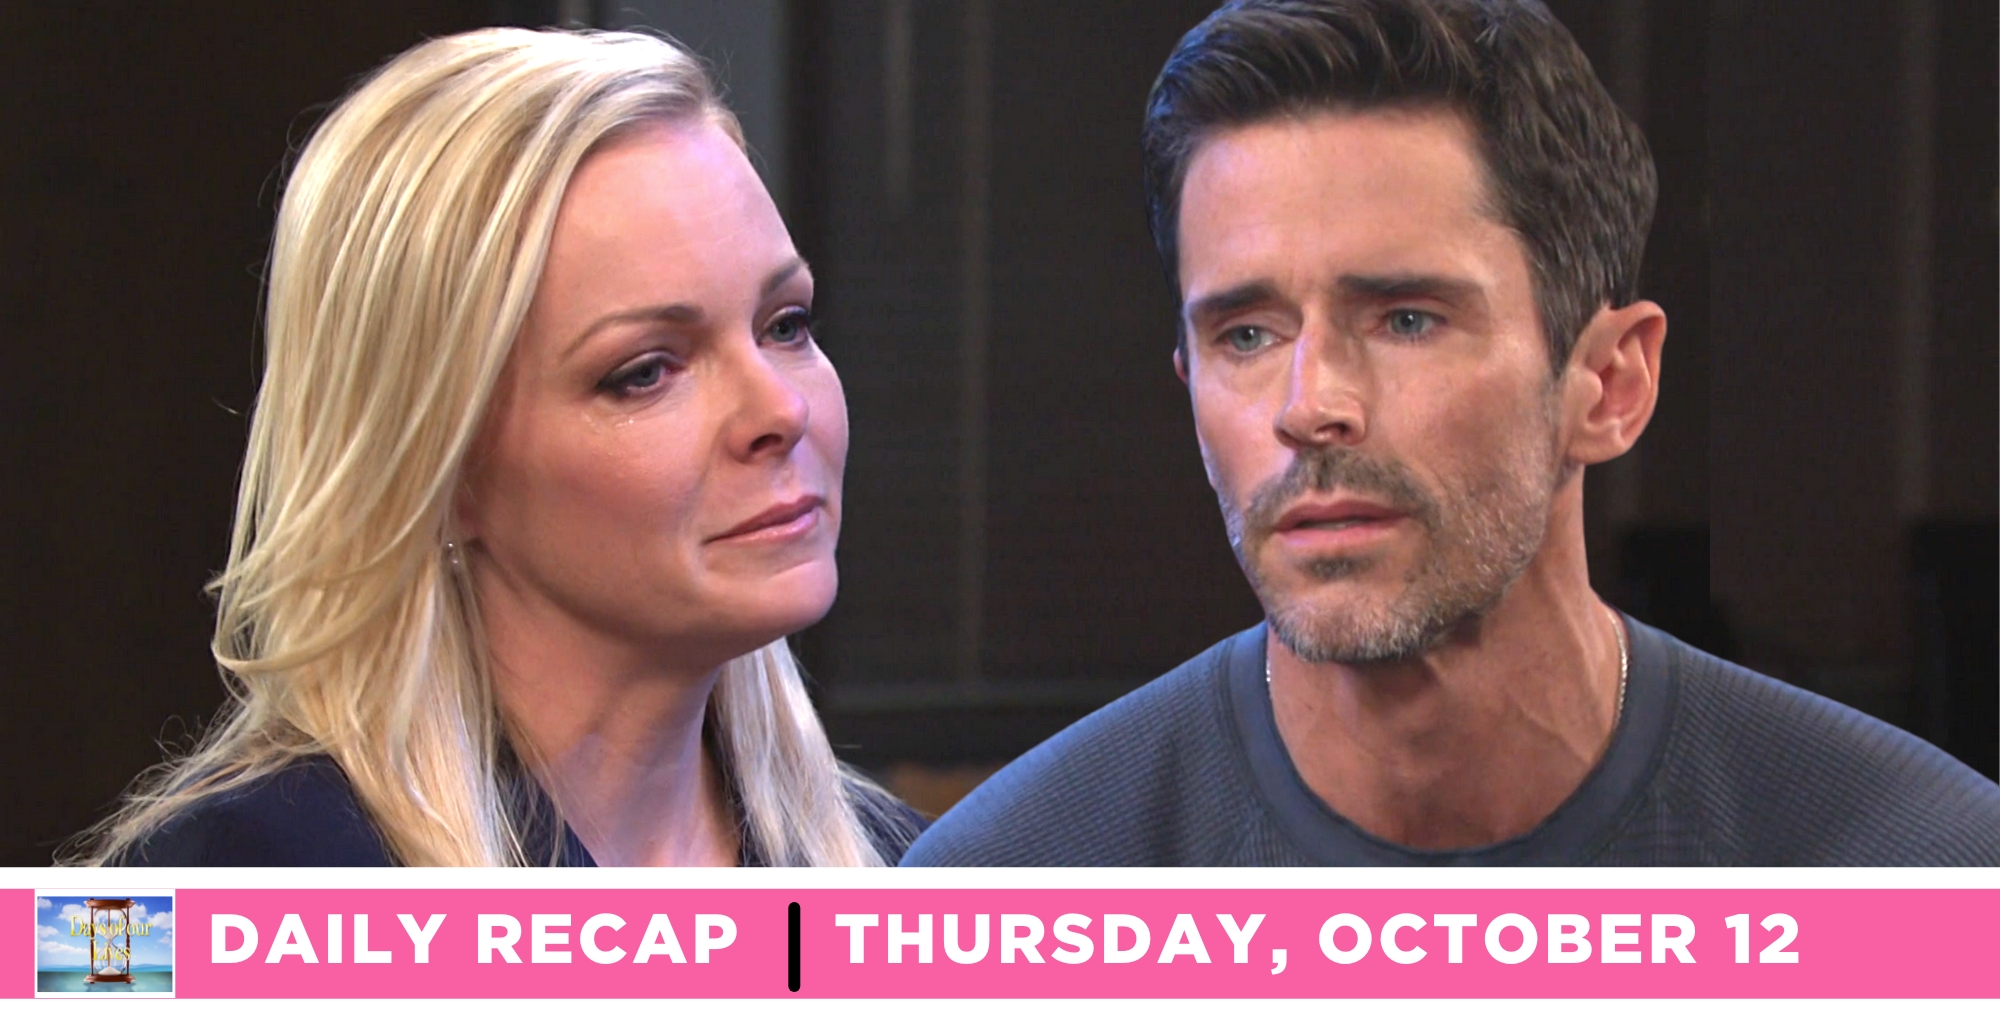 shawn brady told belle black he needs a break on days of our lives recap for thursday, october 11, 2023.